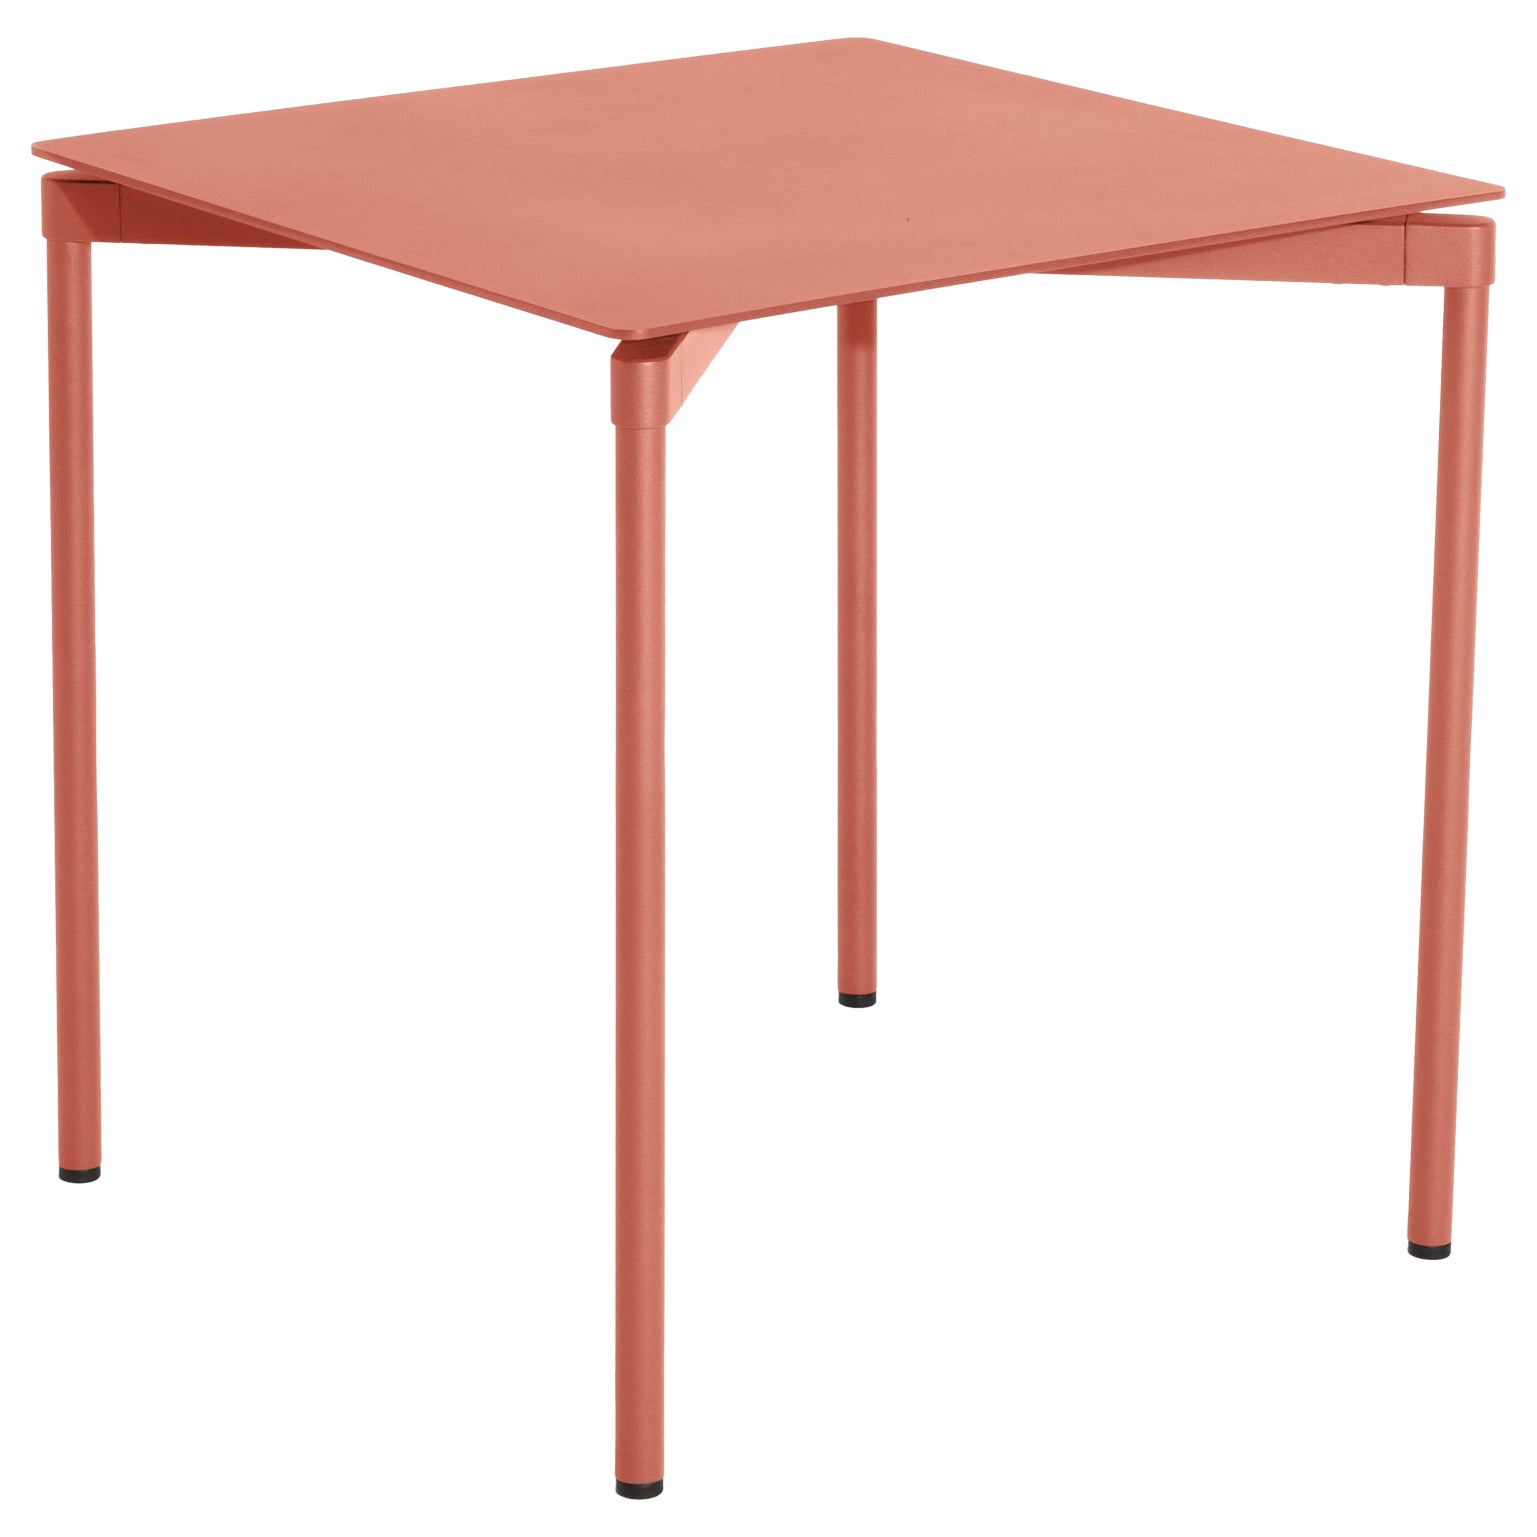 Petite Friture Fromme Square Table in Coral Aluminium by Tom Chung For Sale